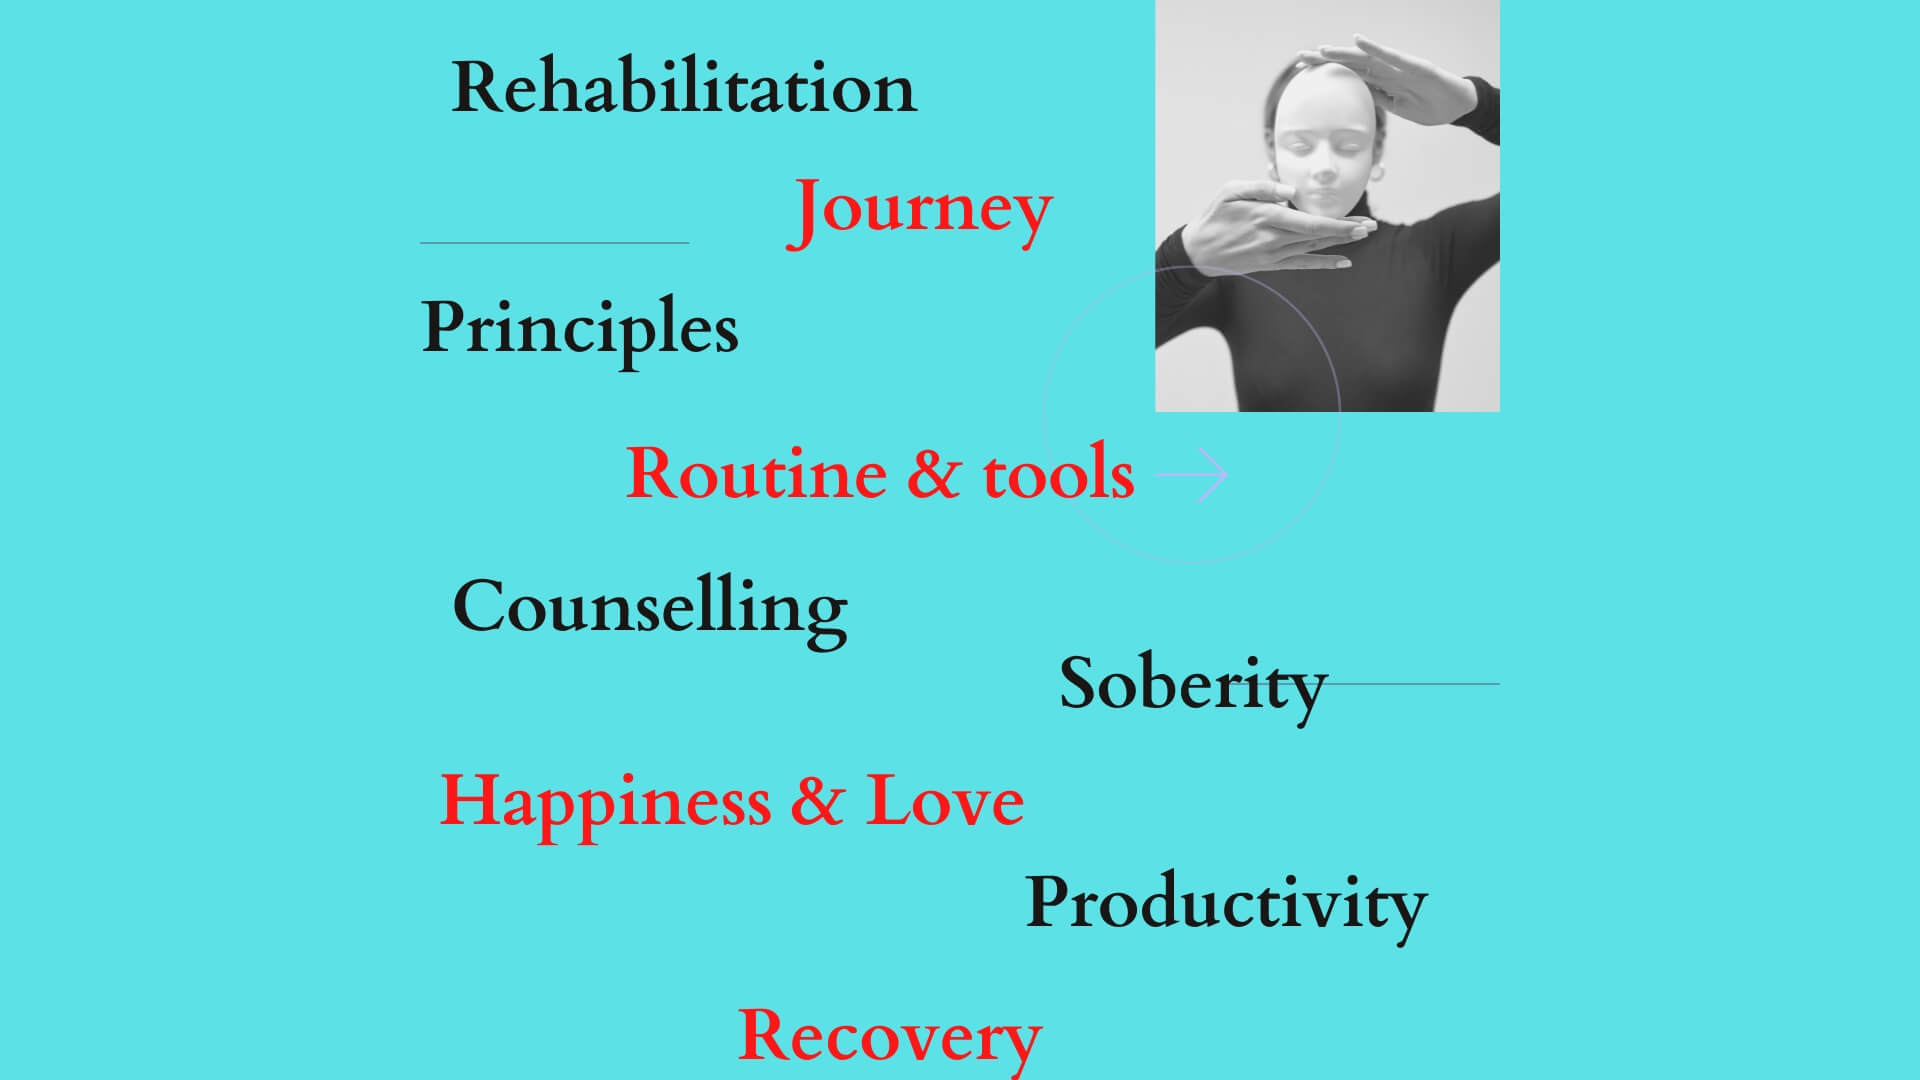 Principles used at our rehab centre for addiction recovery